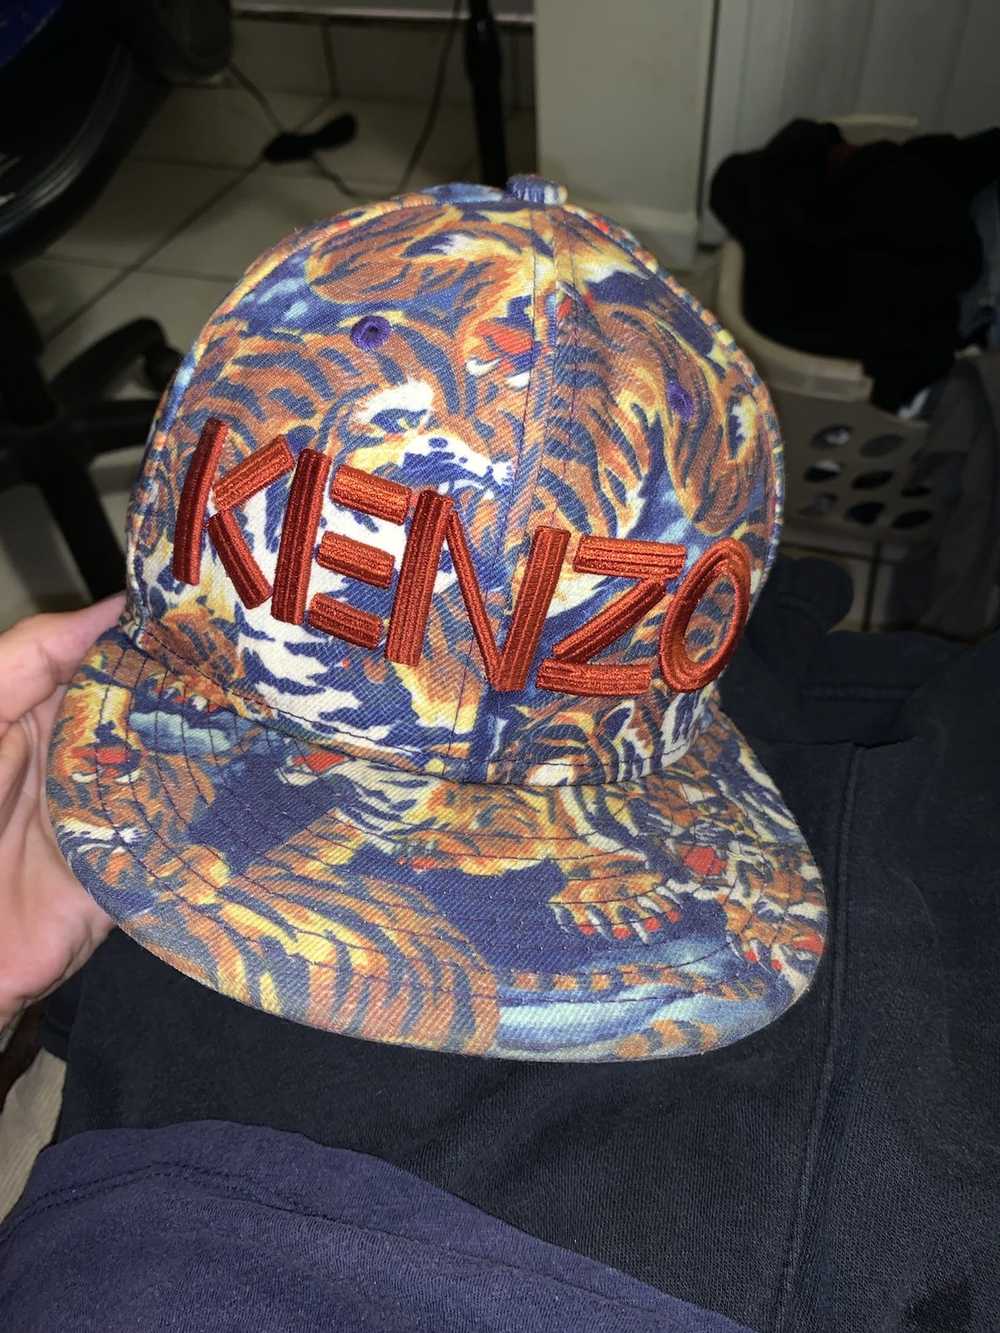 Kenzo Kenzo crouching tiger fitted hat - image 1